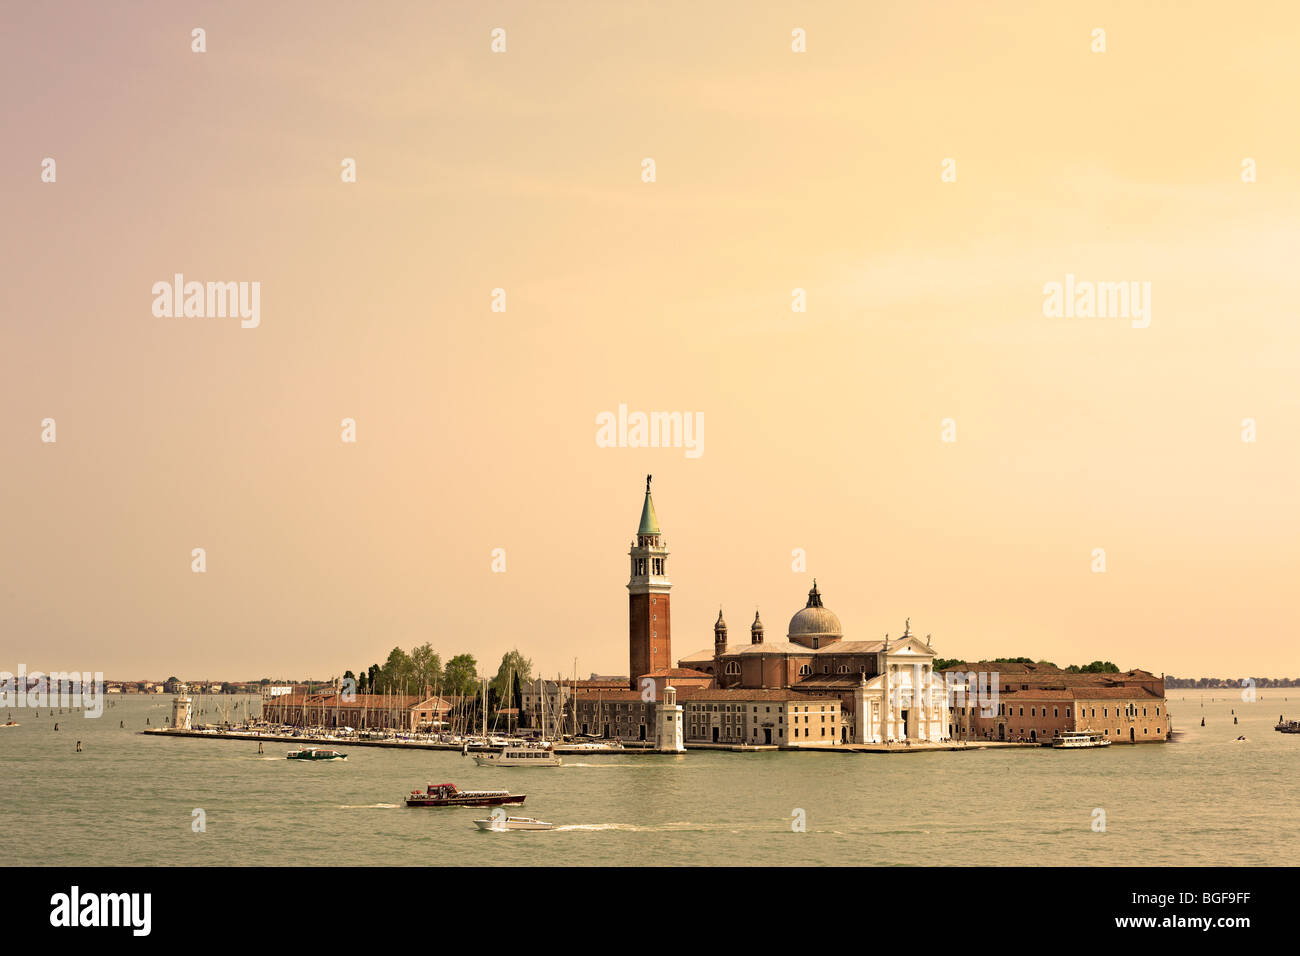 San giorgio maggiore at dusk stock images Alamy hi-res photography and 